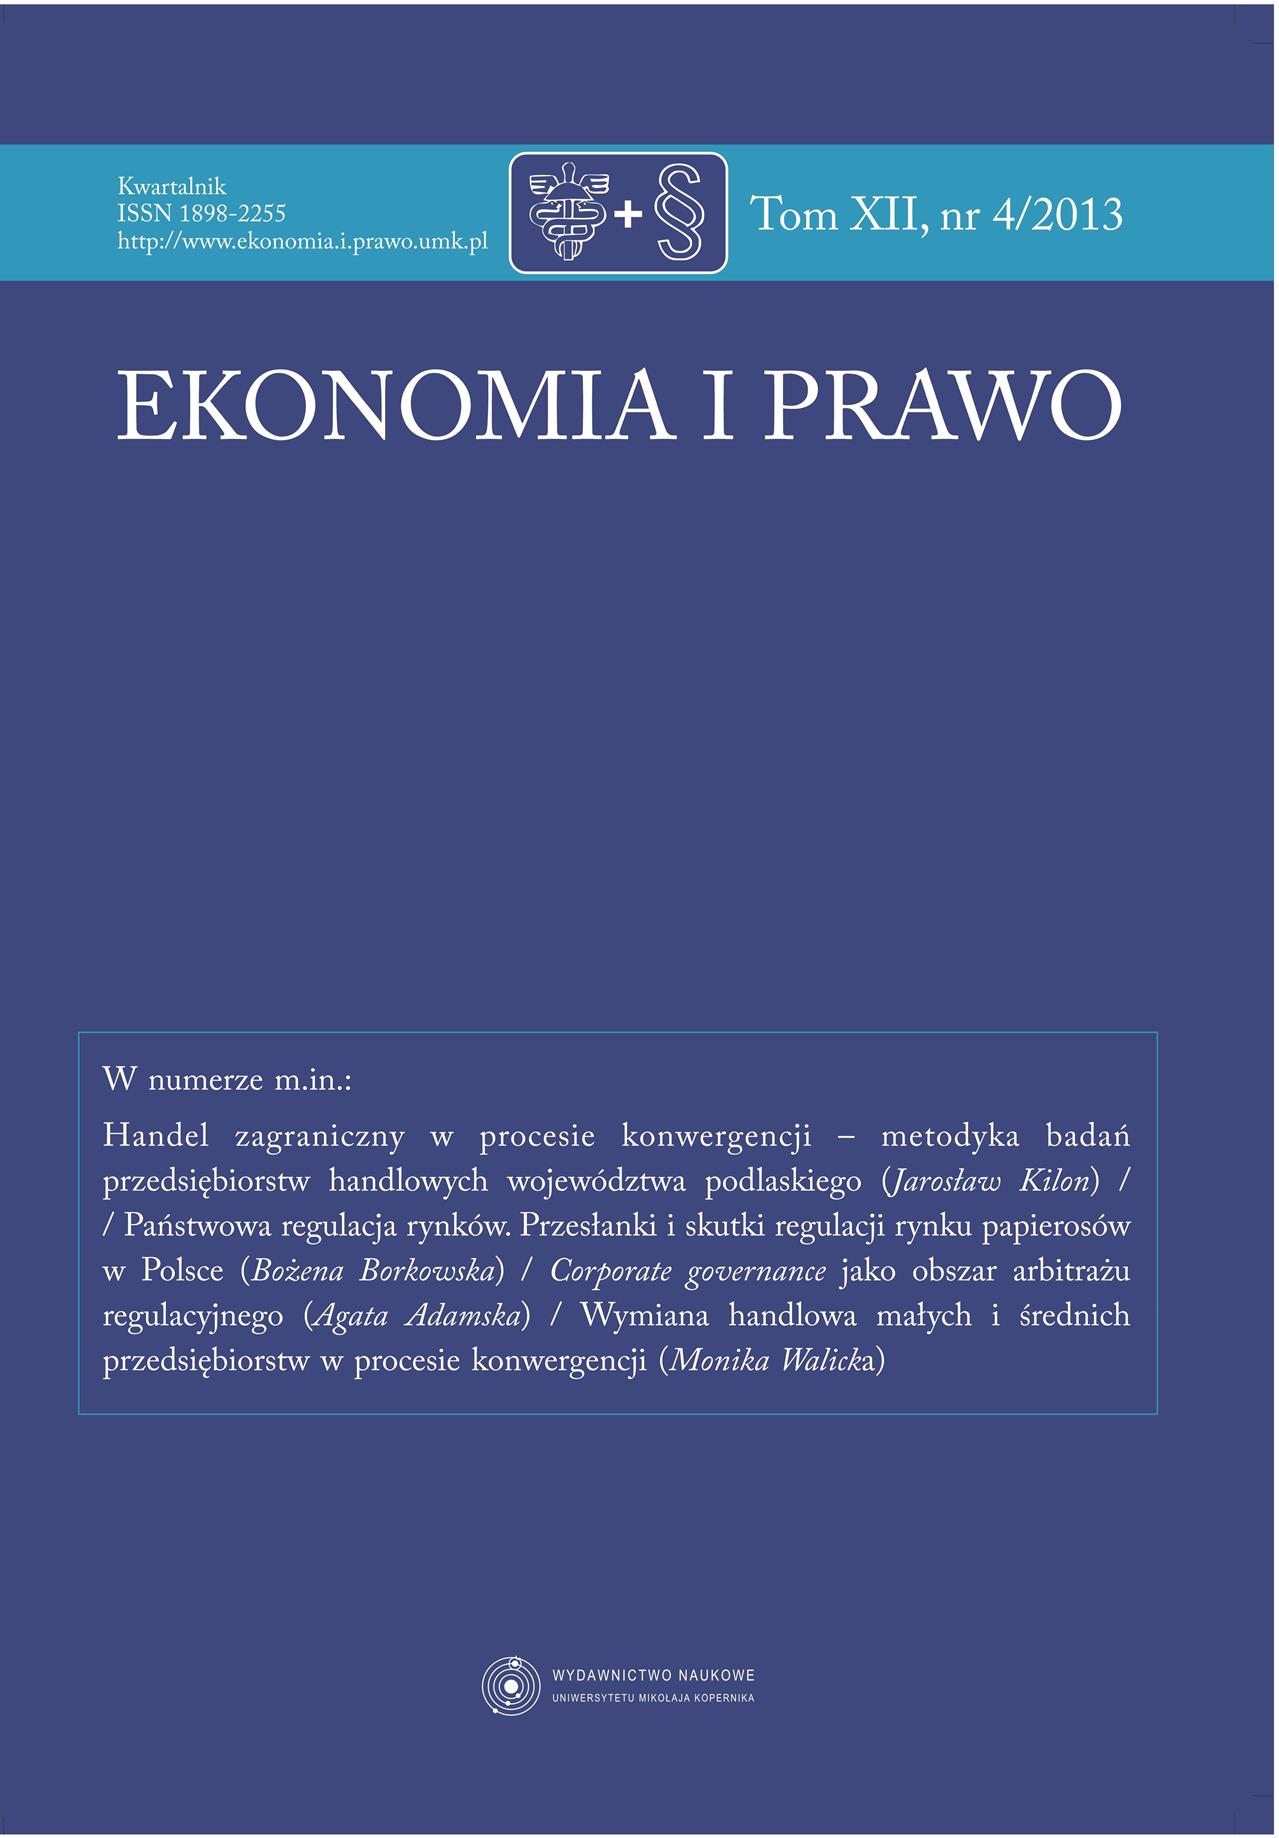 FOREIGN TRADE IN THE CONVERGENCE PROCESS – RESEARCH METHODOLOGY OF TRADING COMPANIES IN THE PODLASKIE REGION Cover Image